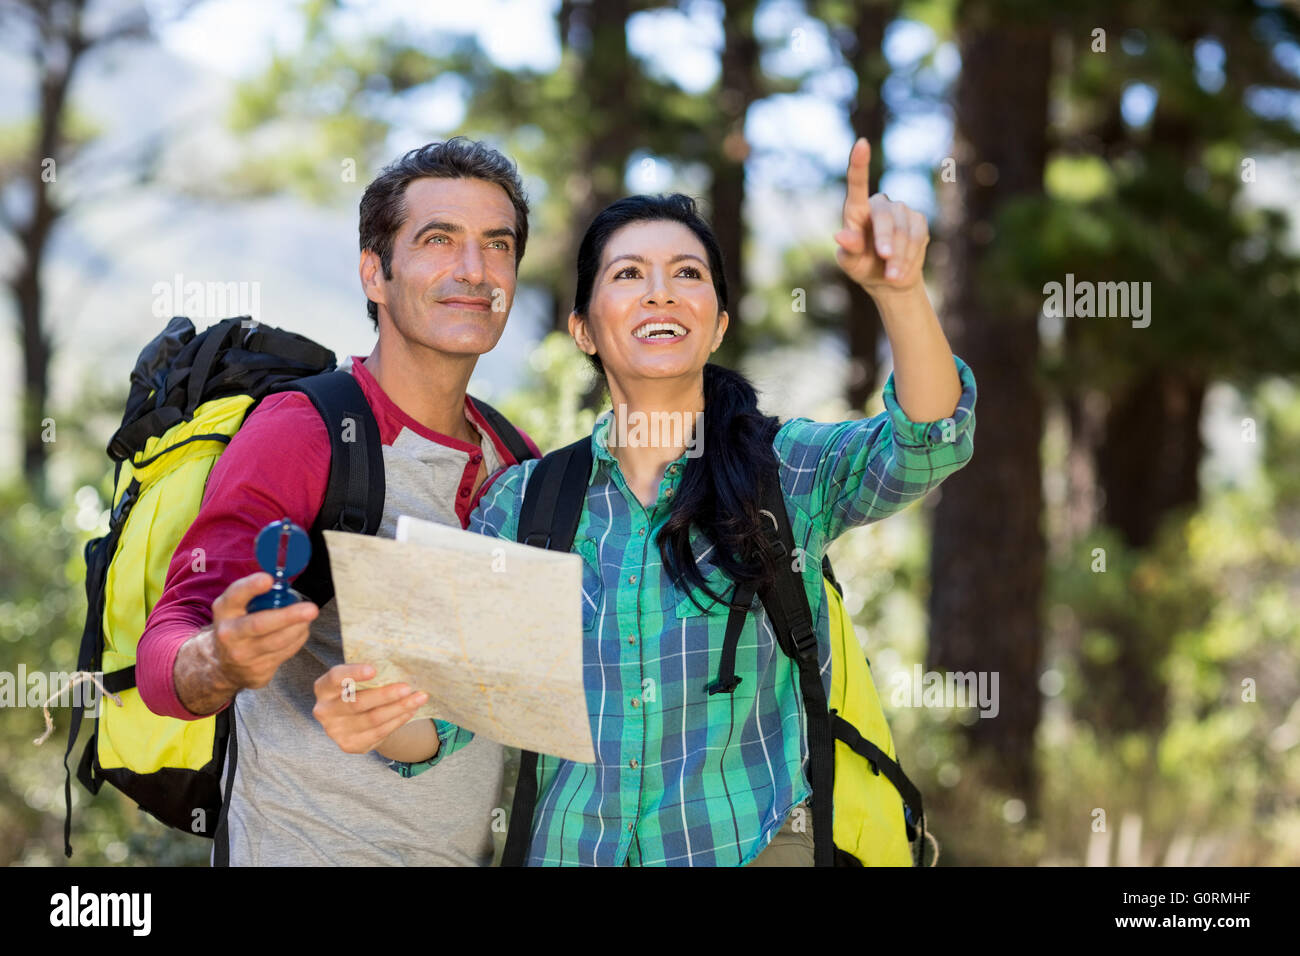 Couple pointing and holding a map Stock Photo